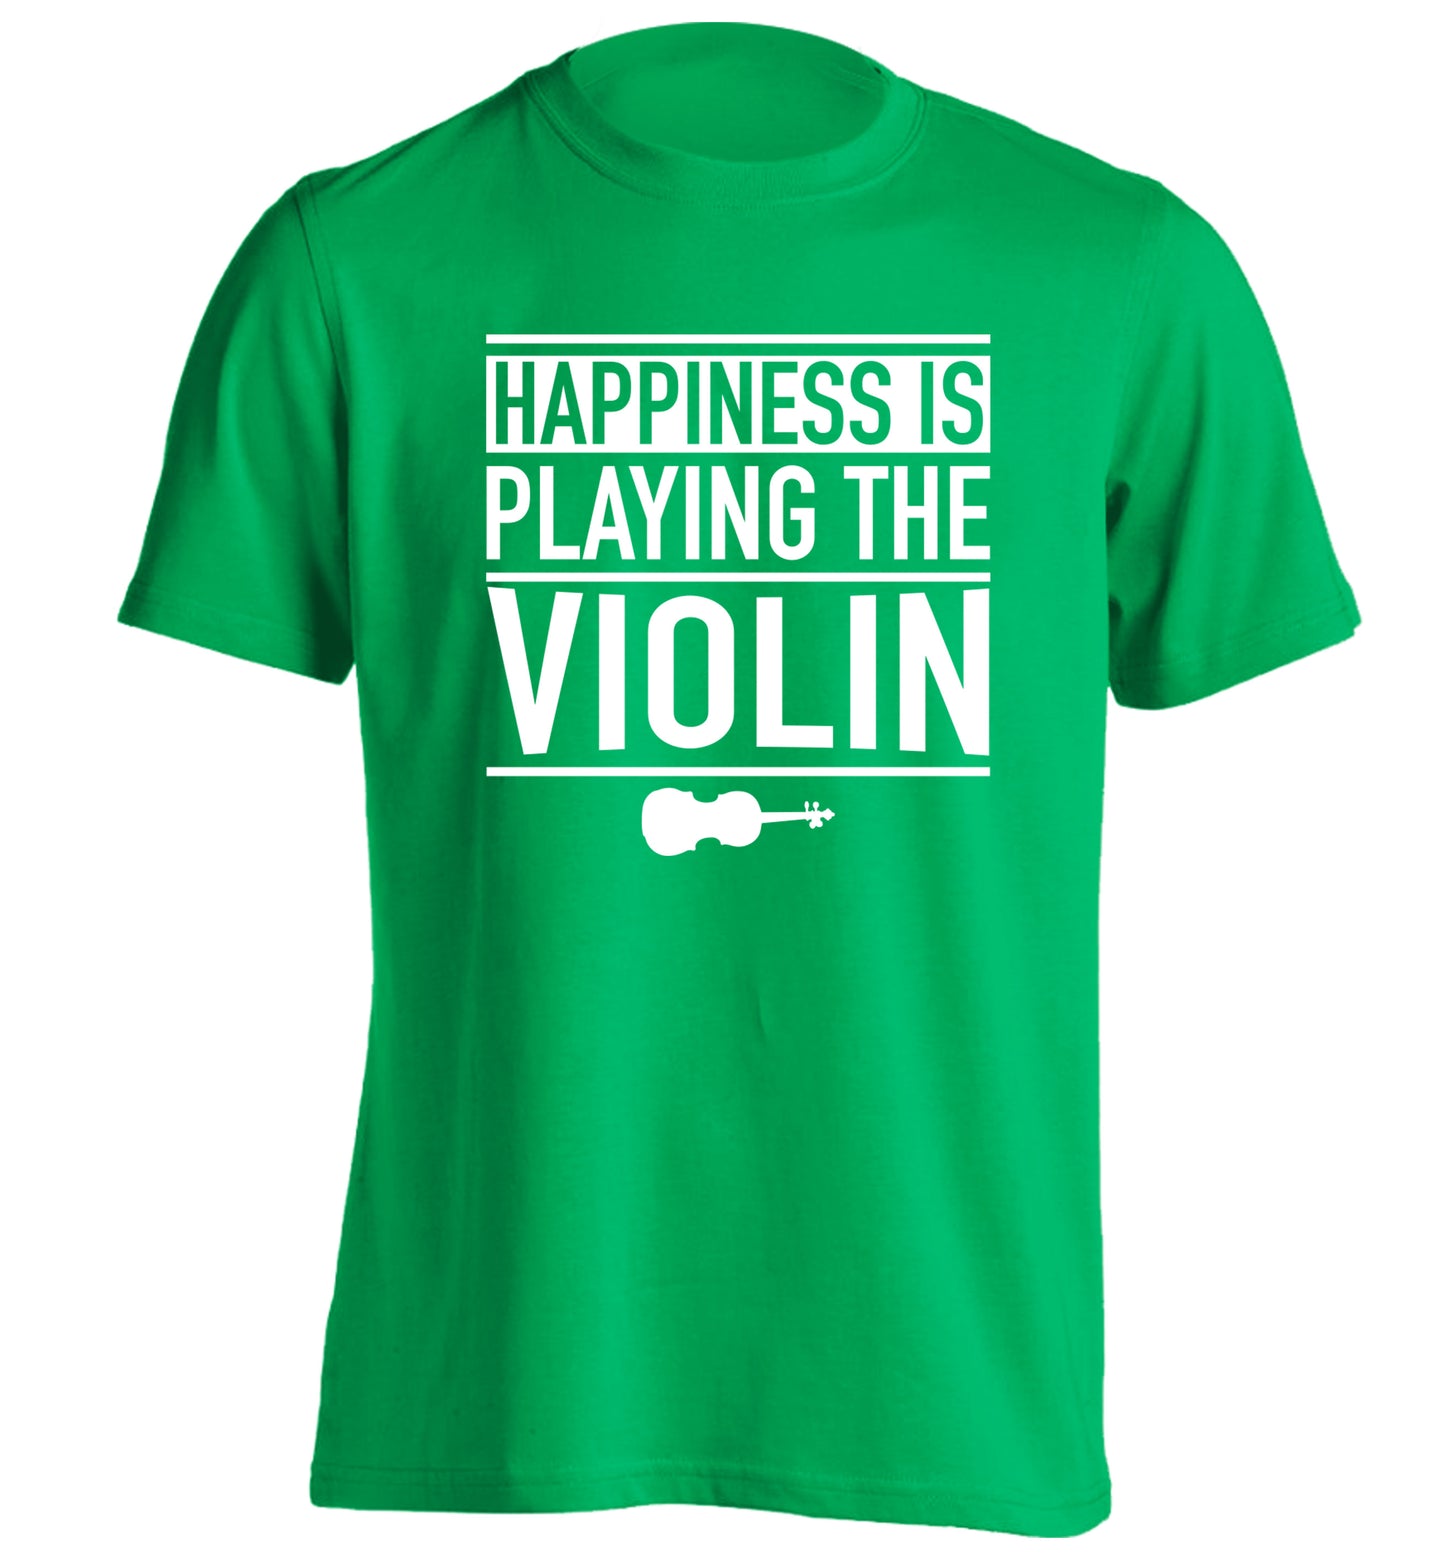 Happiness is playing the violin adults unisex green Tshirt 2XL